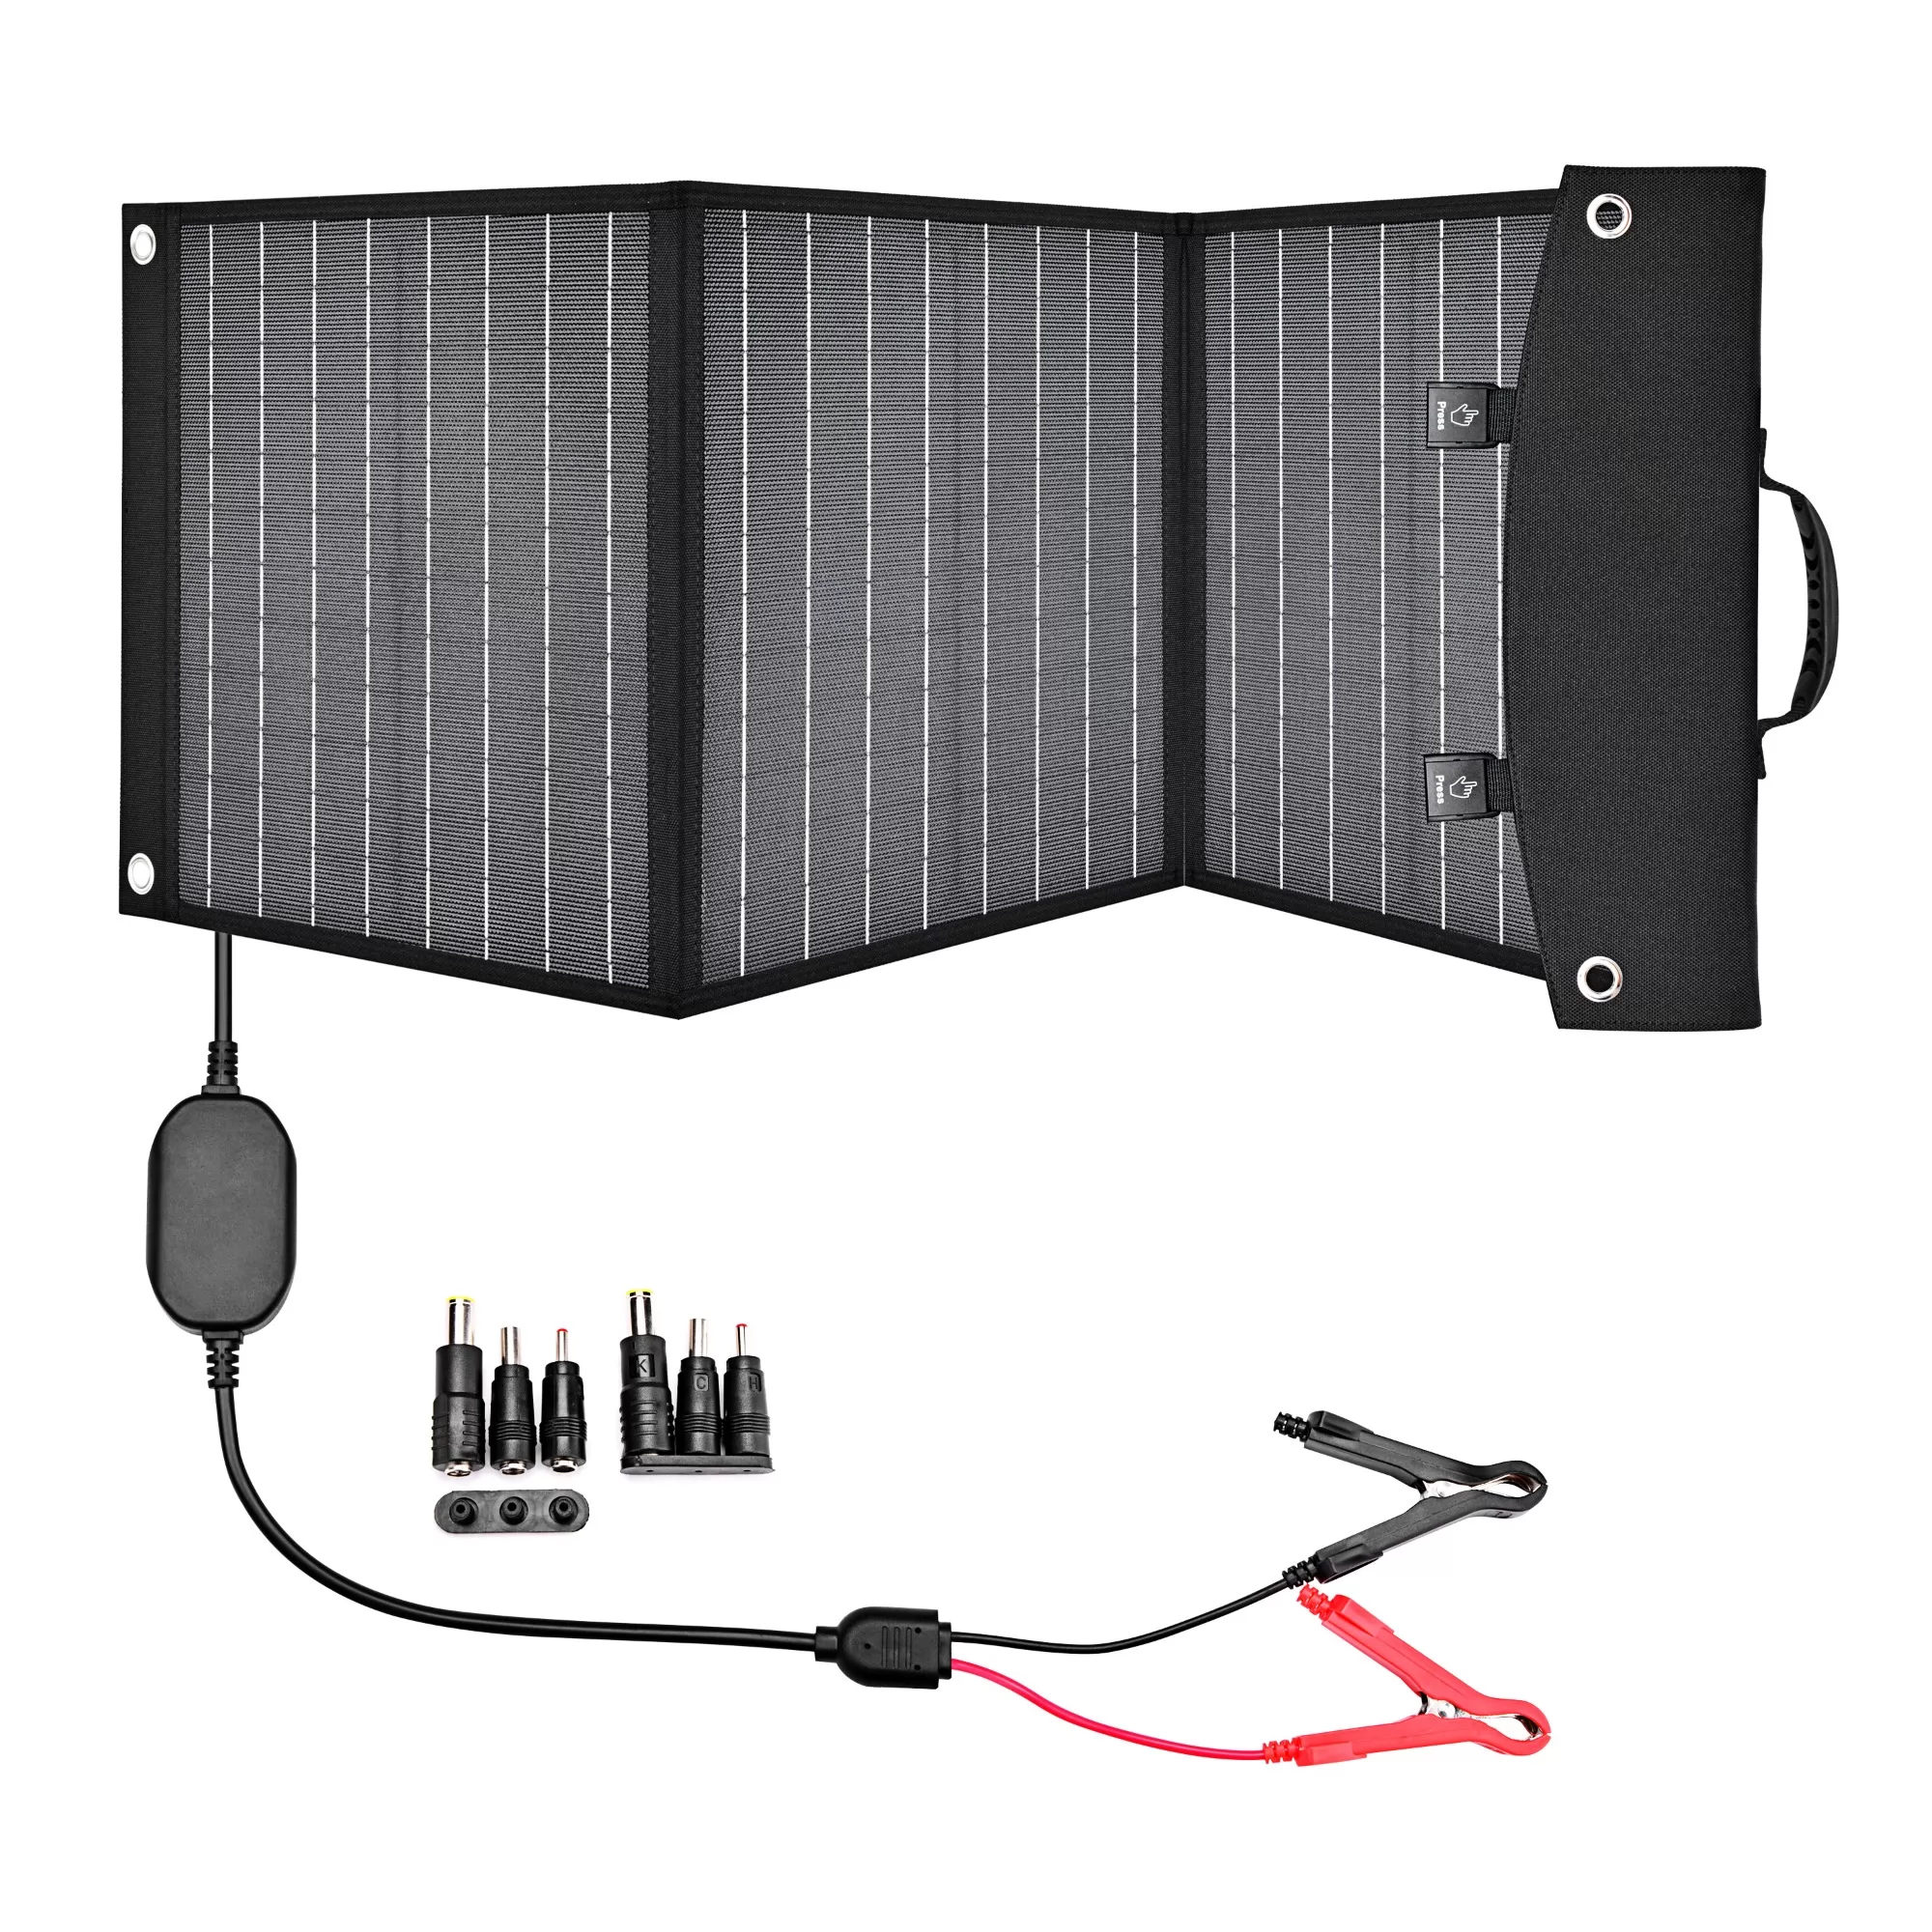 Foldable Solar Panel Charger 60W